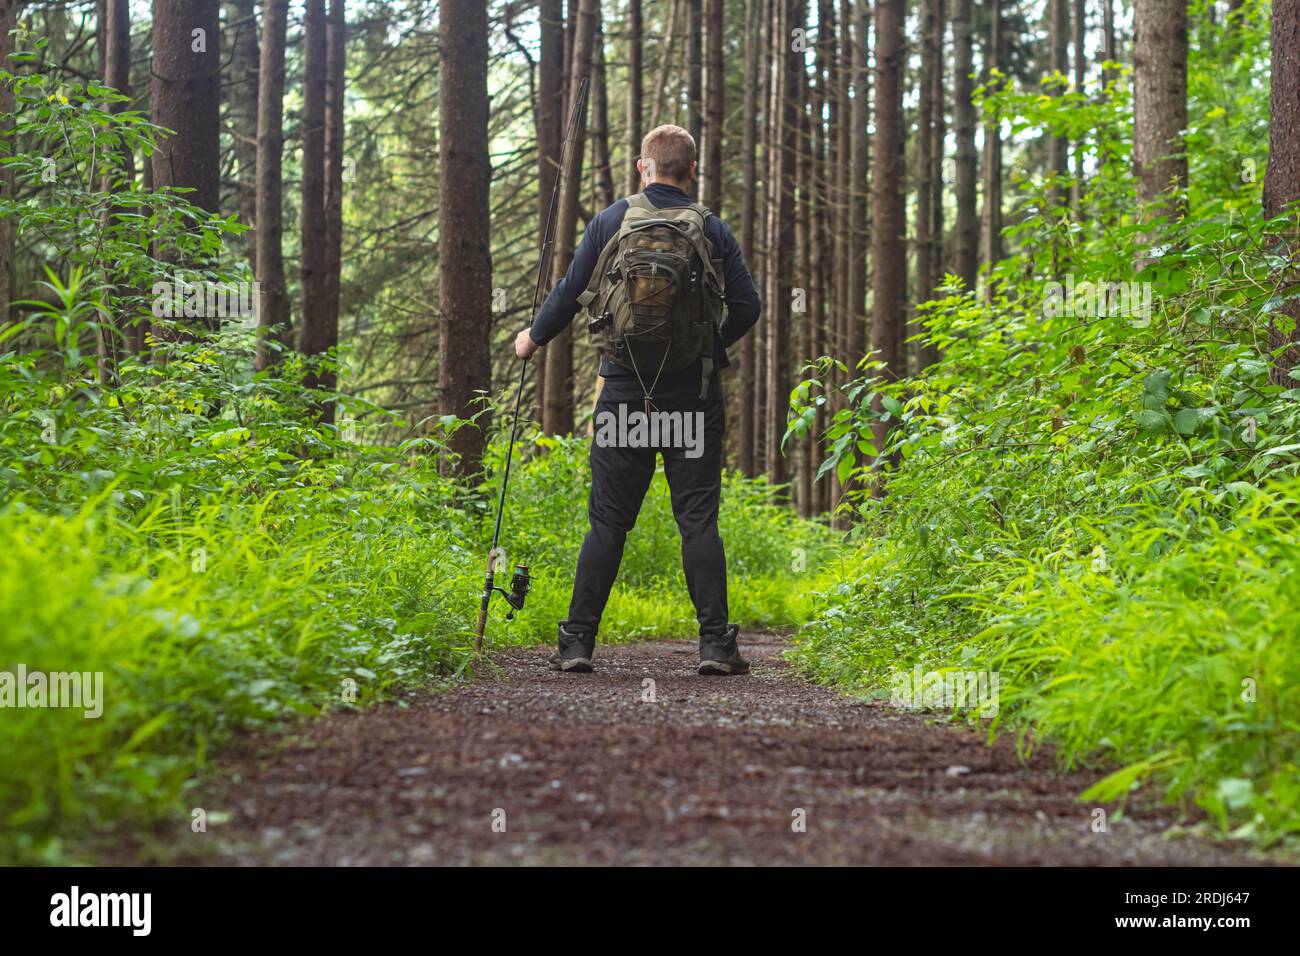 woodland trail summer no people natural backgrounds outdoors activity copy space Stock Photo